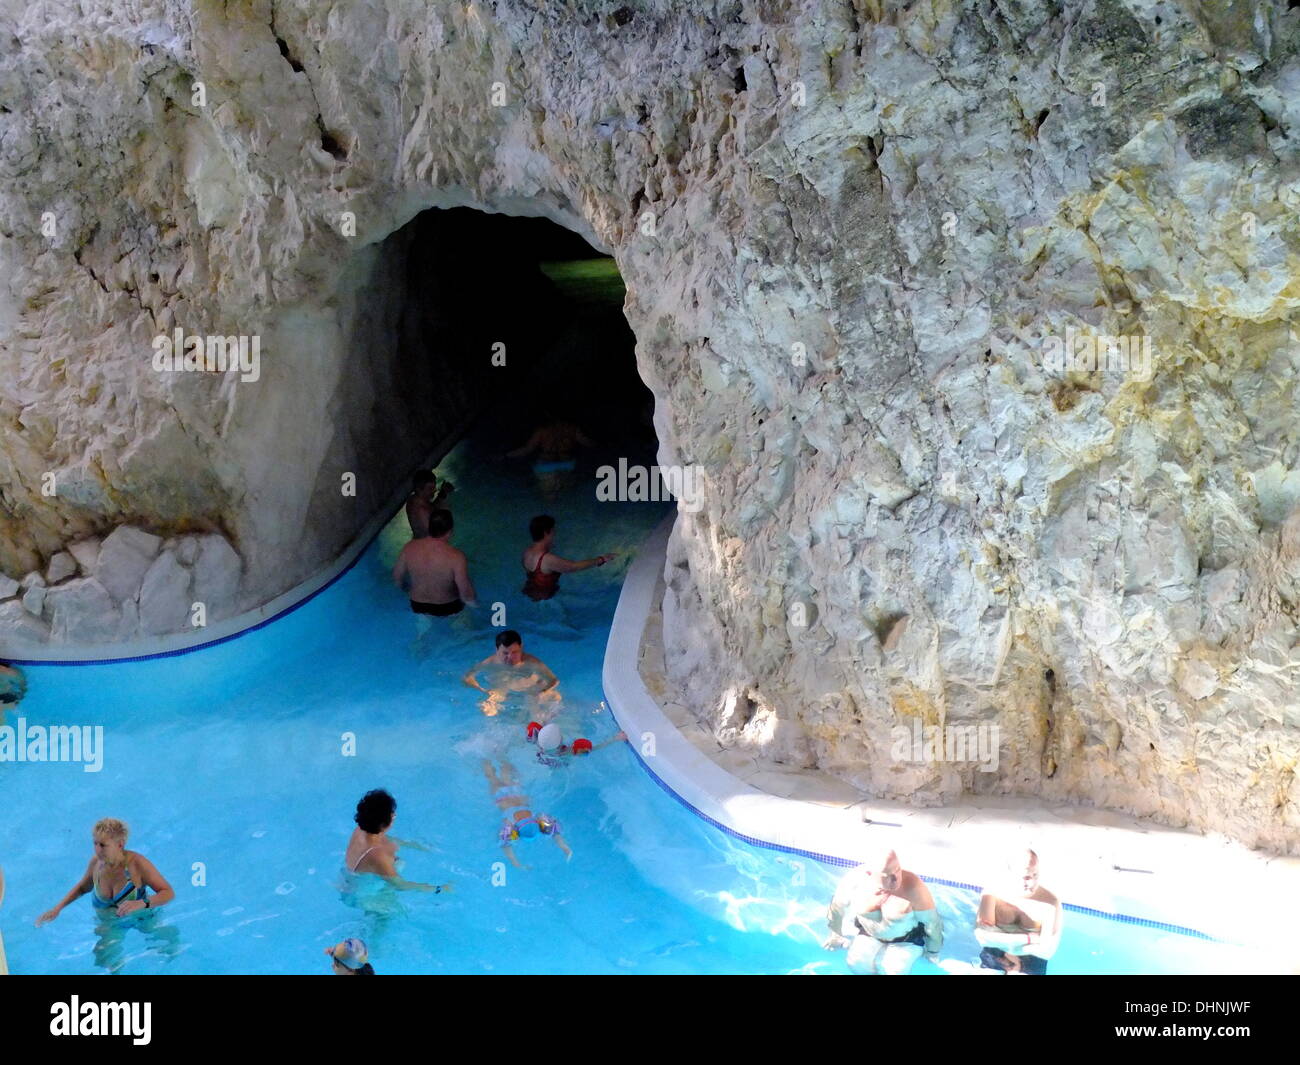 Miskolc , Hungary 10th, November 2013 Miskolc Topolca cave baths with hot termal water, made in natural caves. People walk and swim in kind of canals made in the caves and enjoy hot therapeutic water. Stock Photo